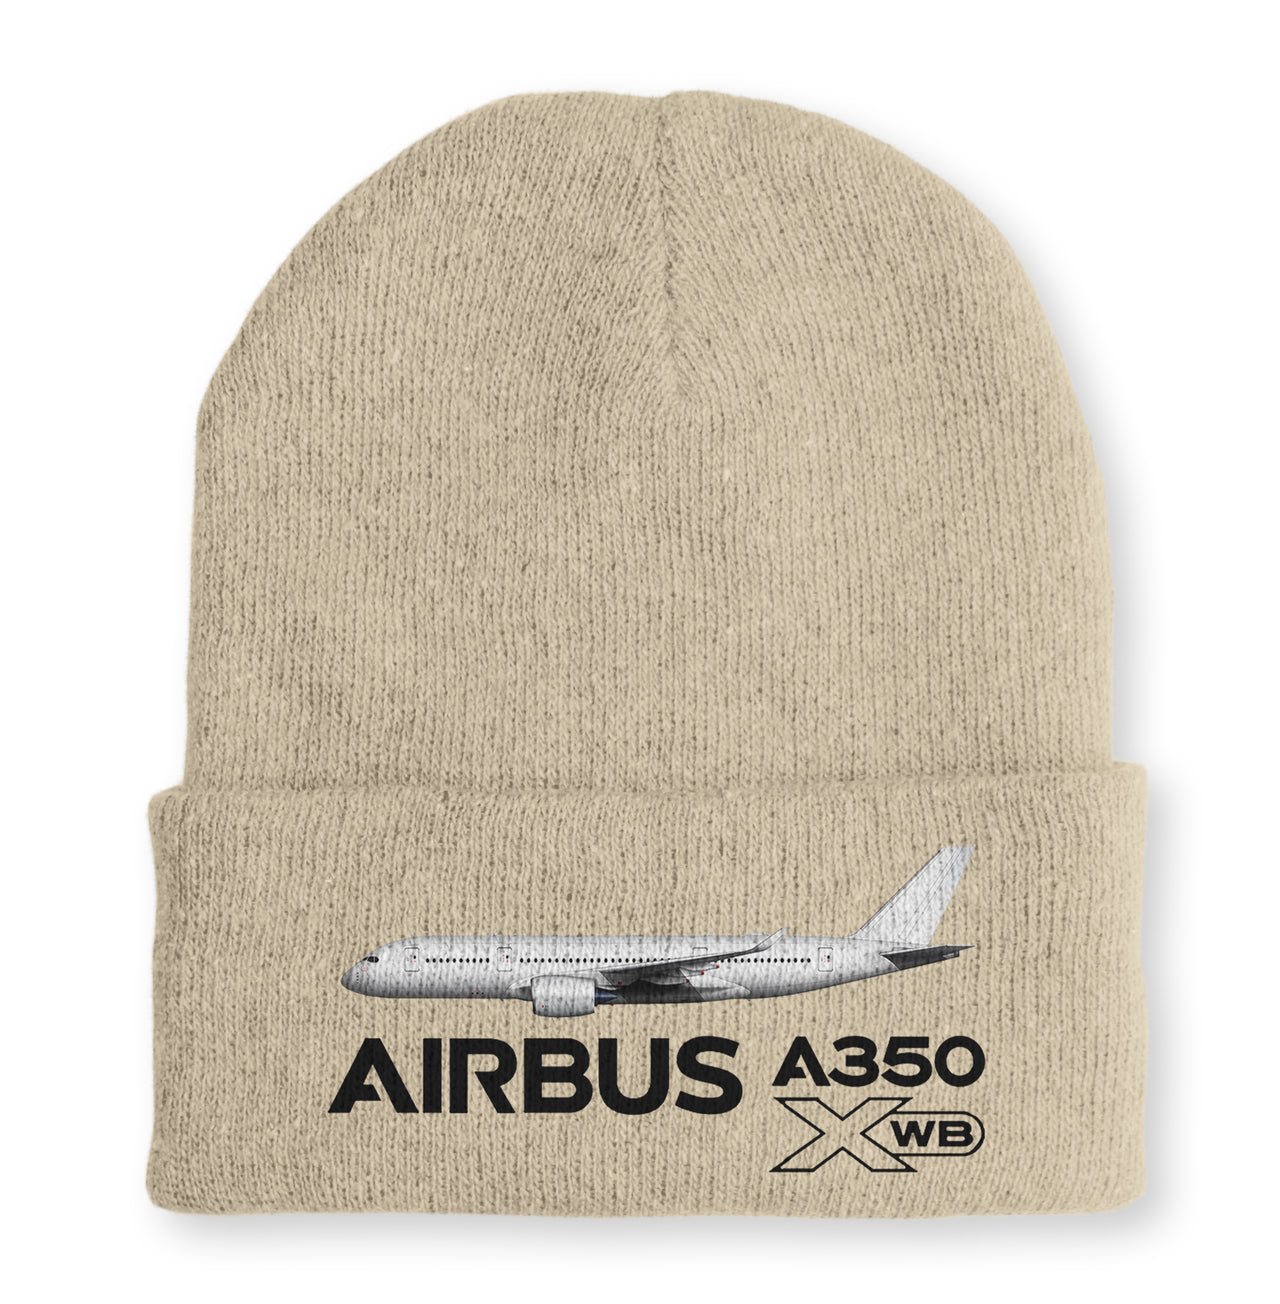 The Airbus A350 WXB Embroidered Beanies